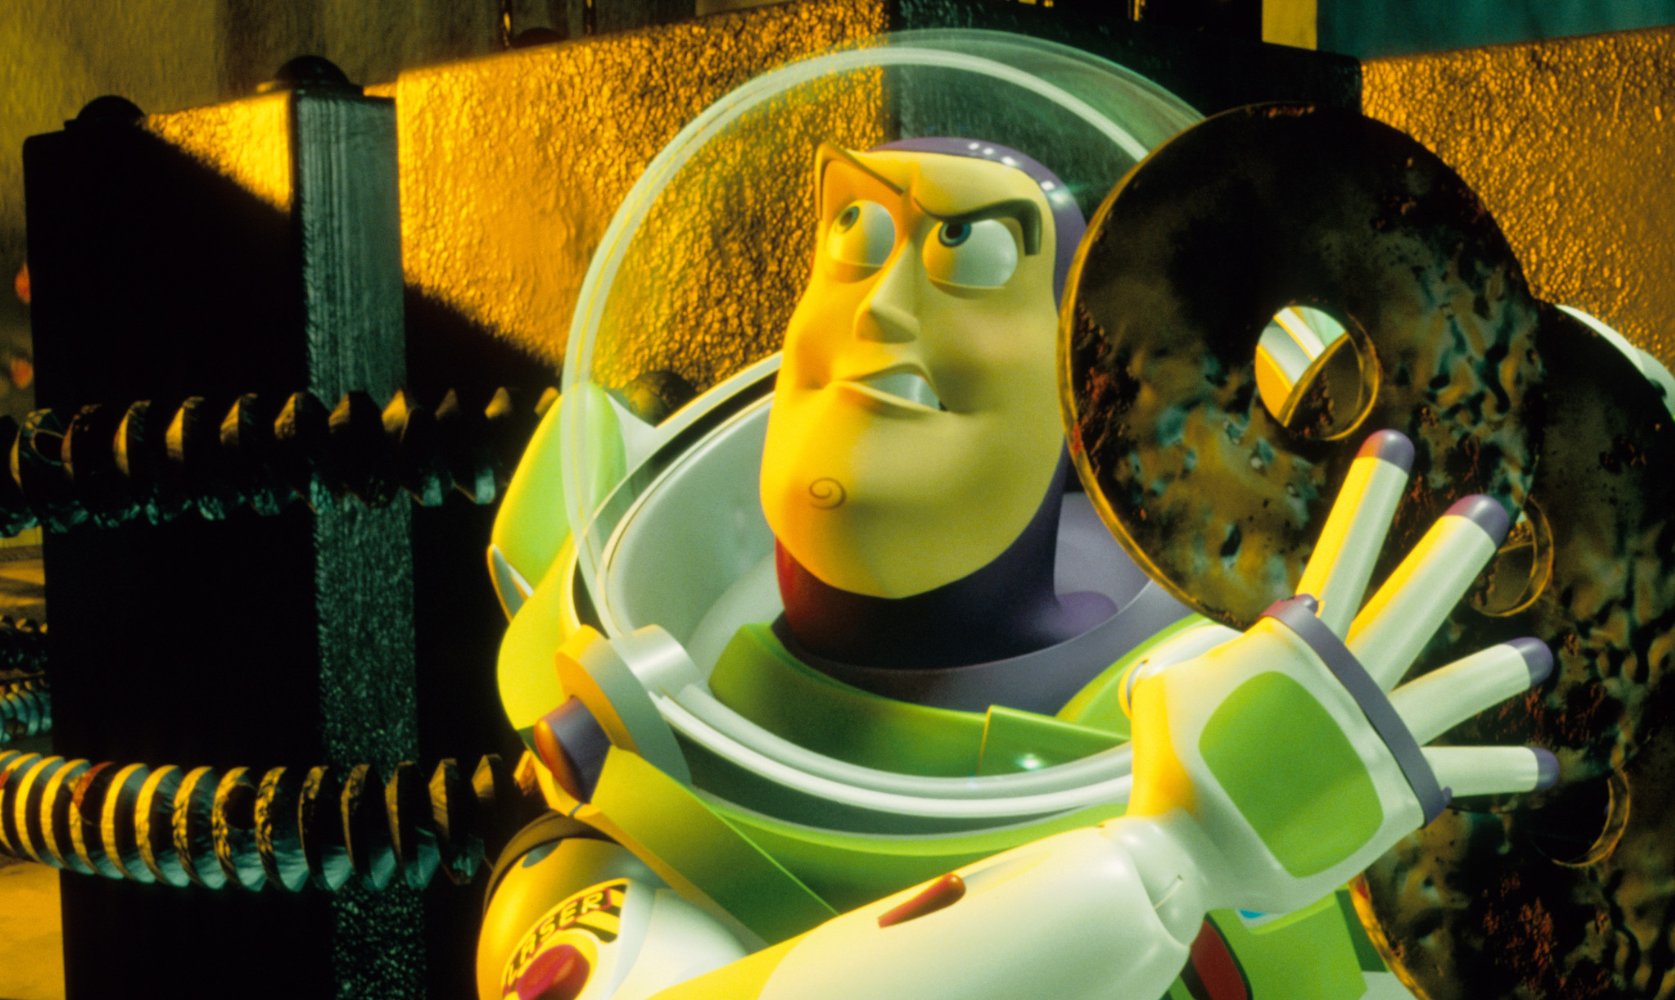 download watch toy story 2 online free dailymotion